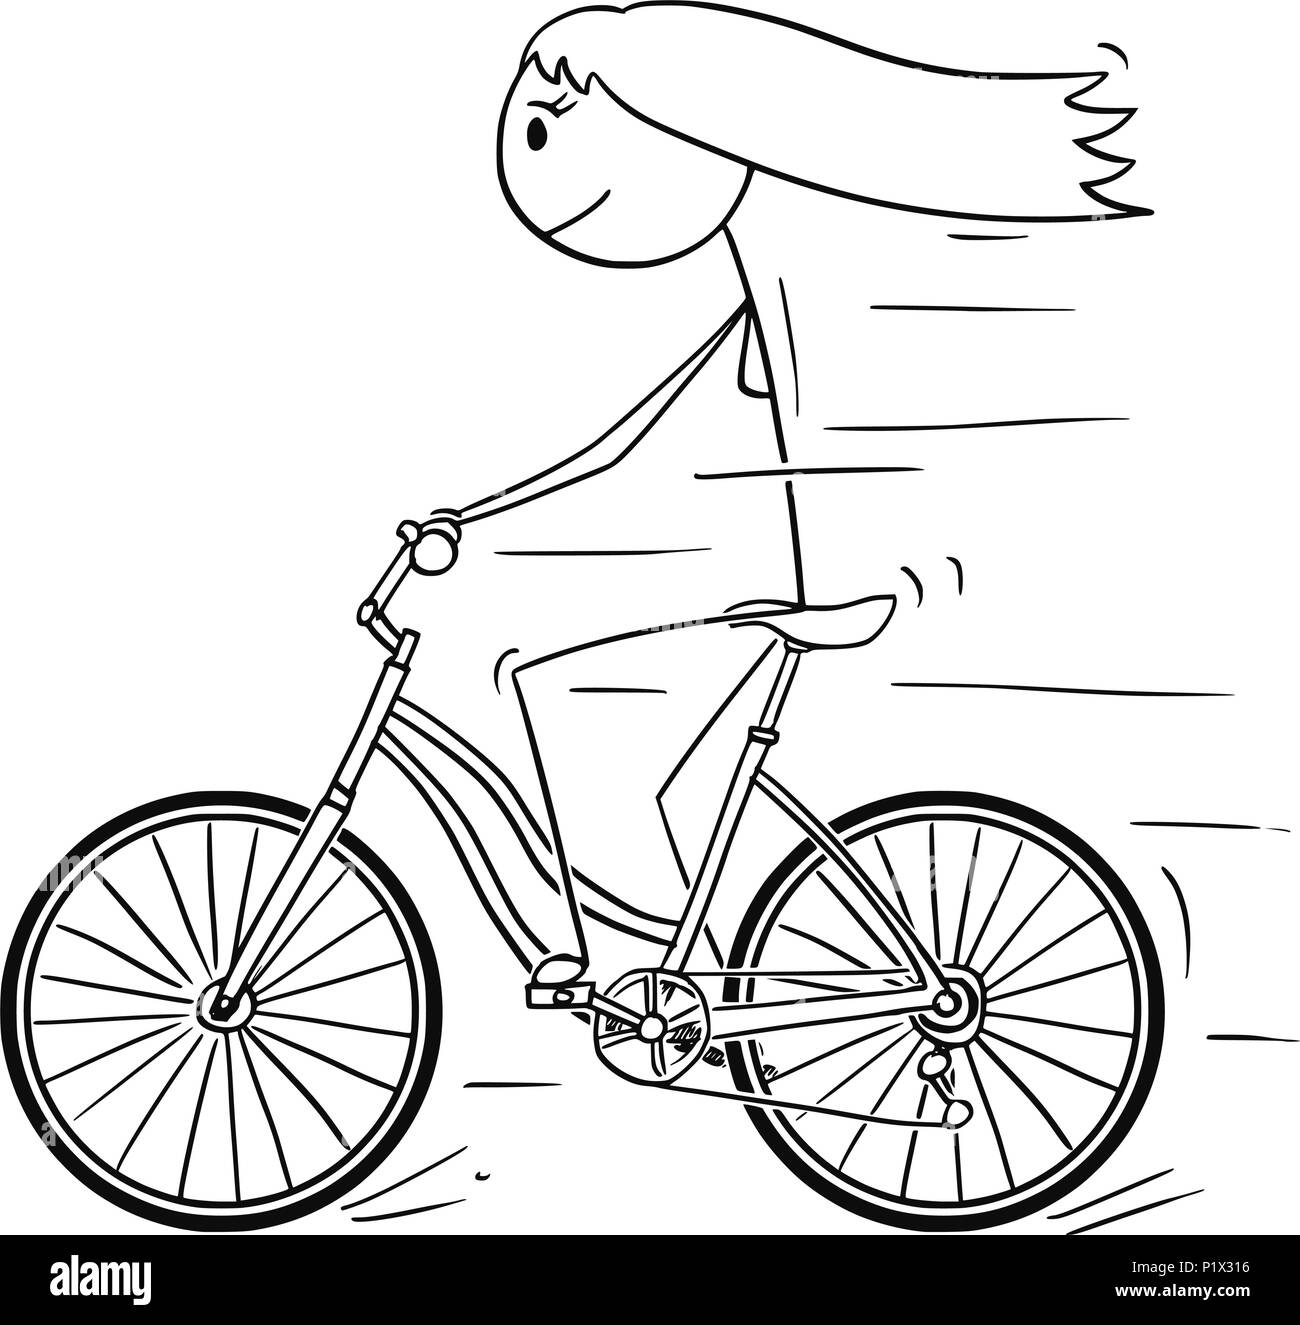 Cartoon of Woman or Girl Riding on Bicycle Stock Vector Image & Art - Alamy